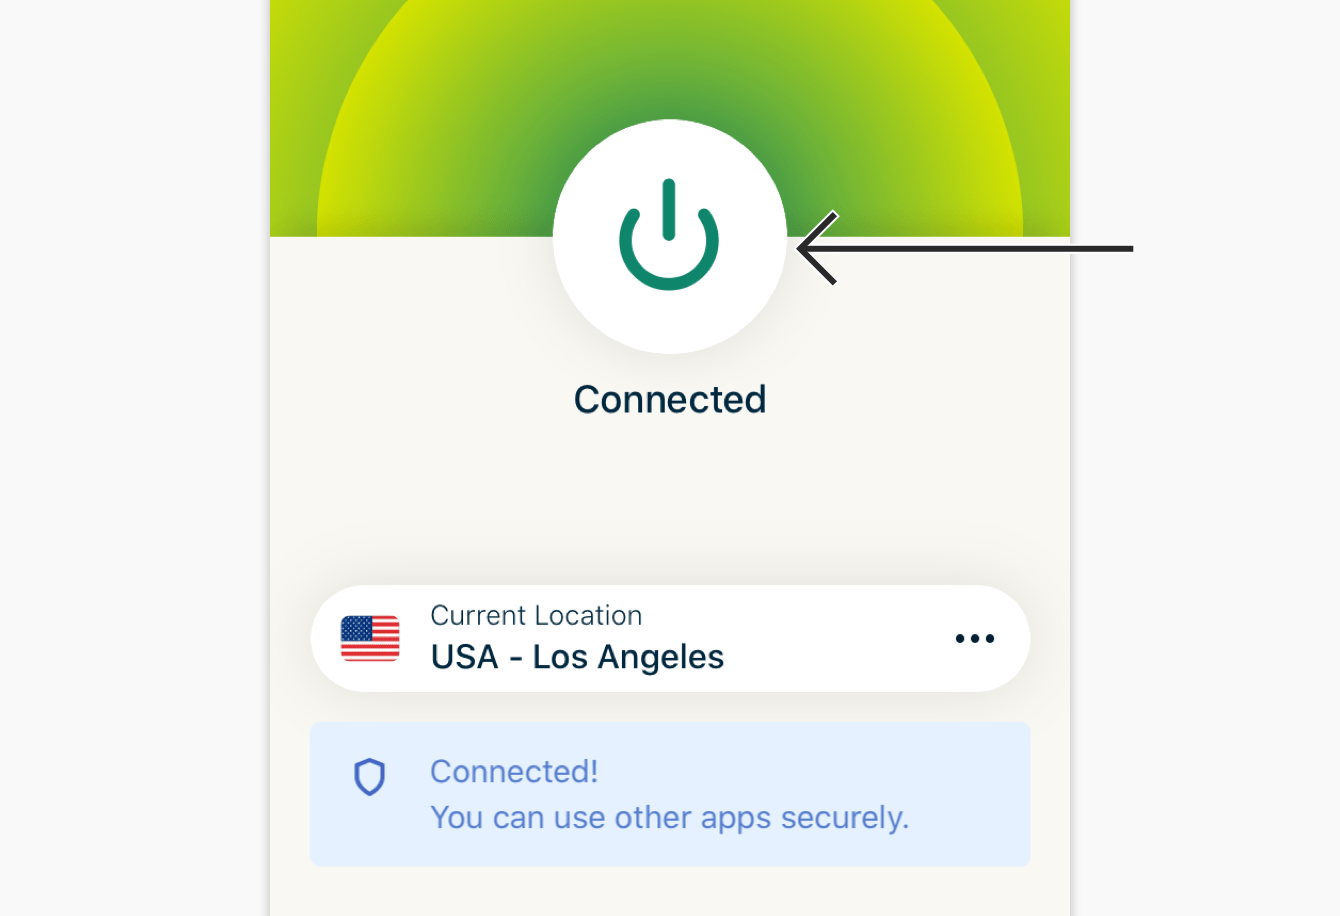 Tap the On Button to disconnect.